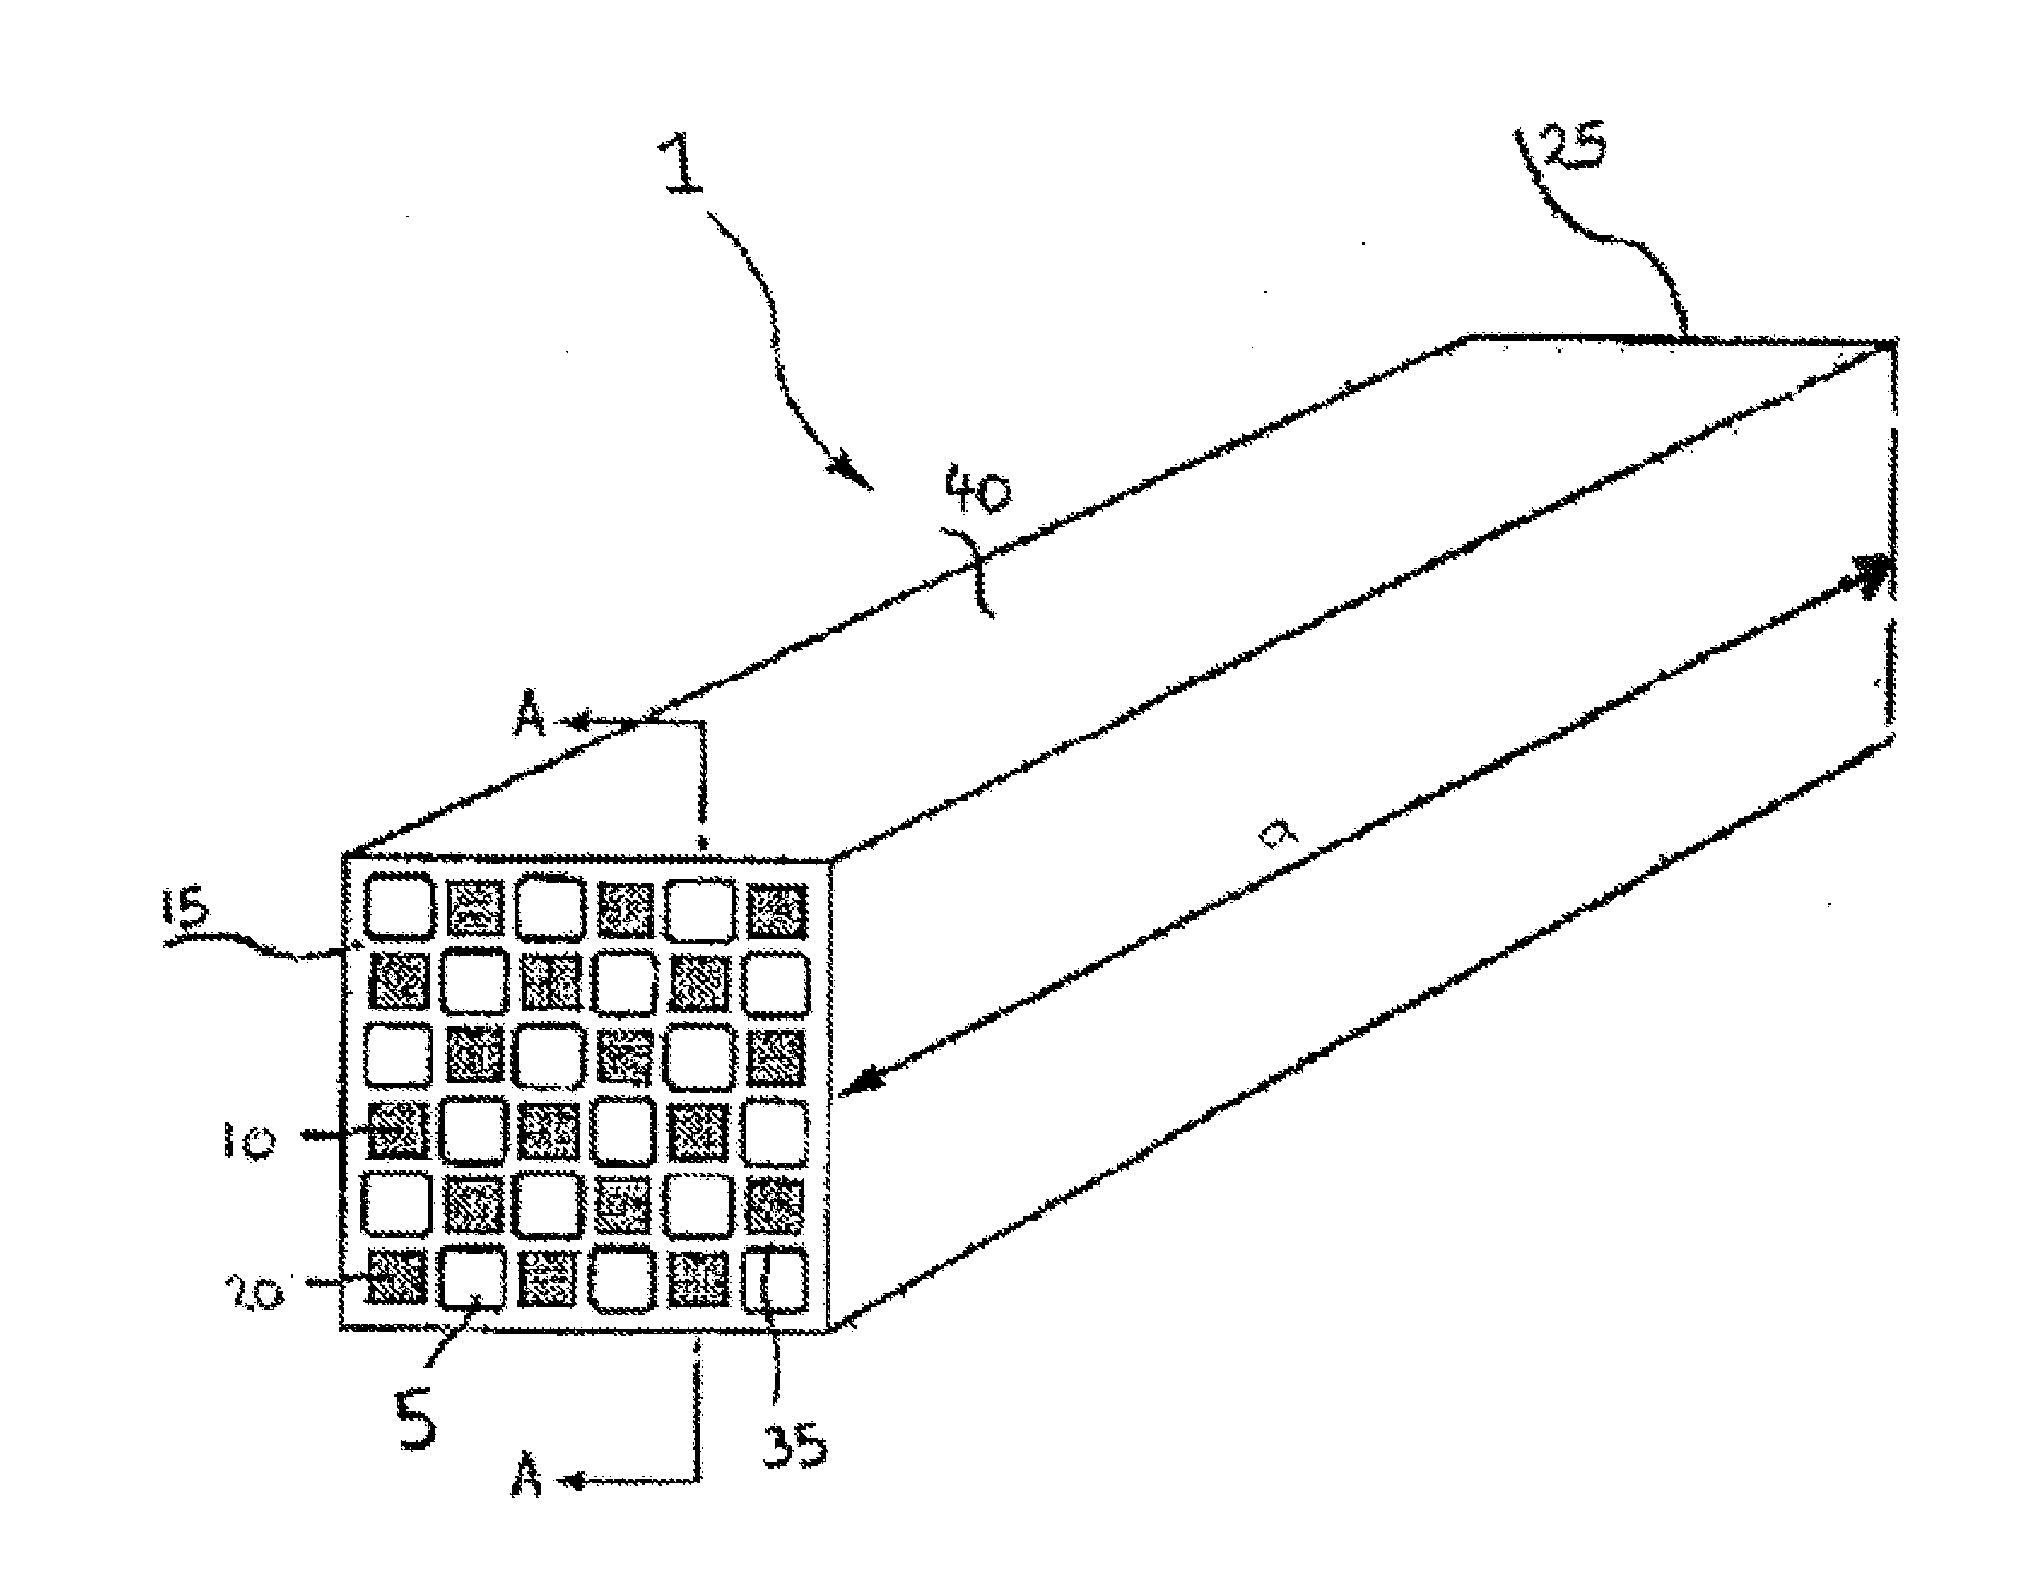 Catalytic wall-flow filter having a membrane